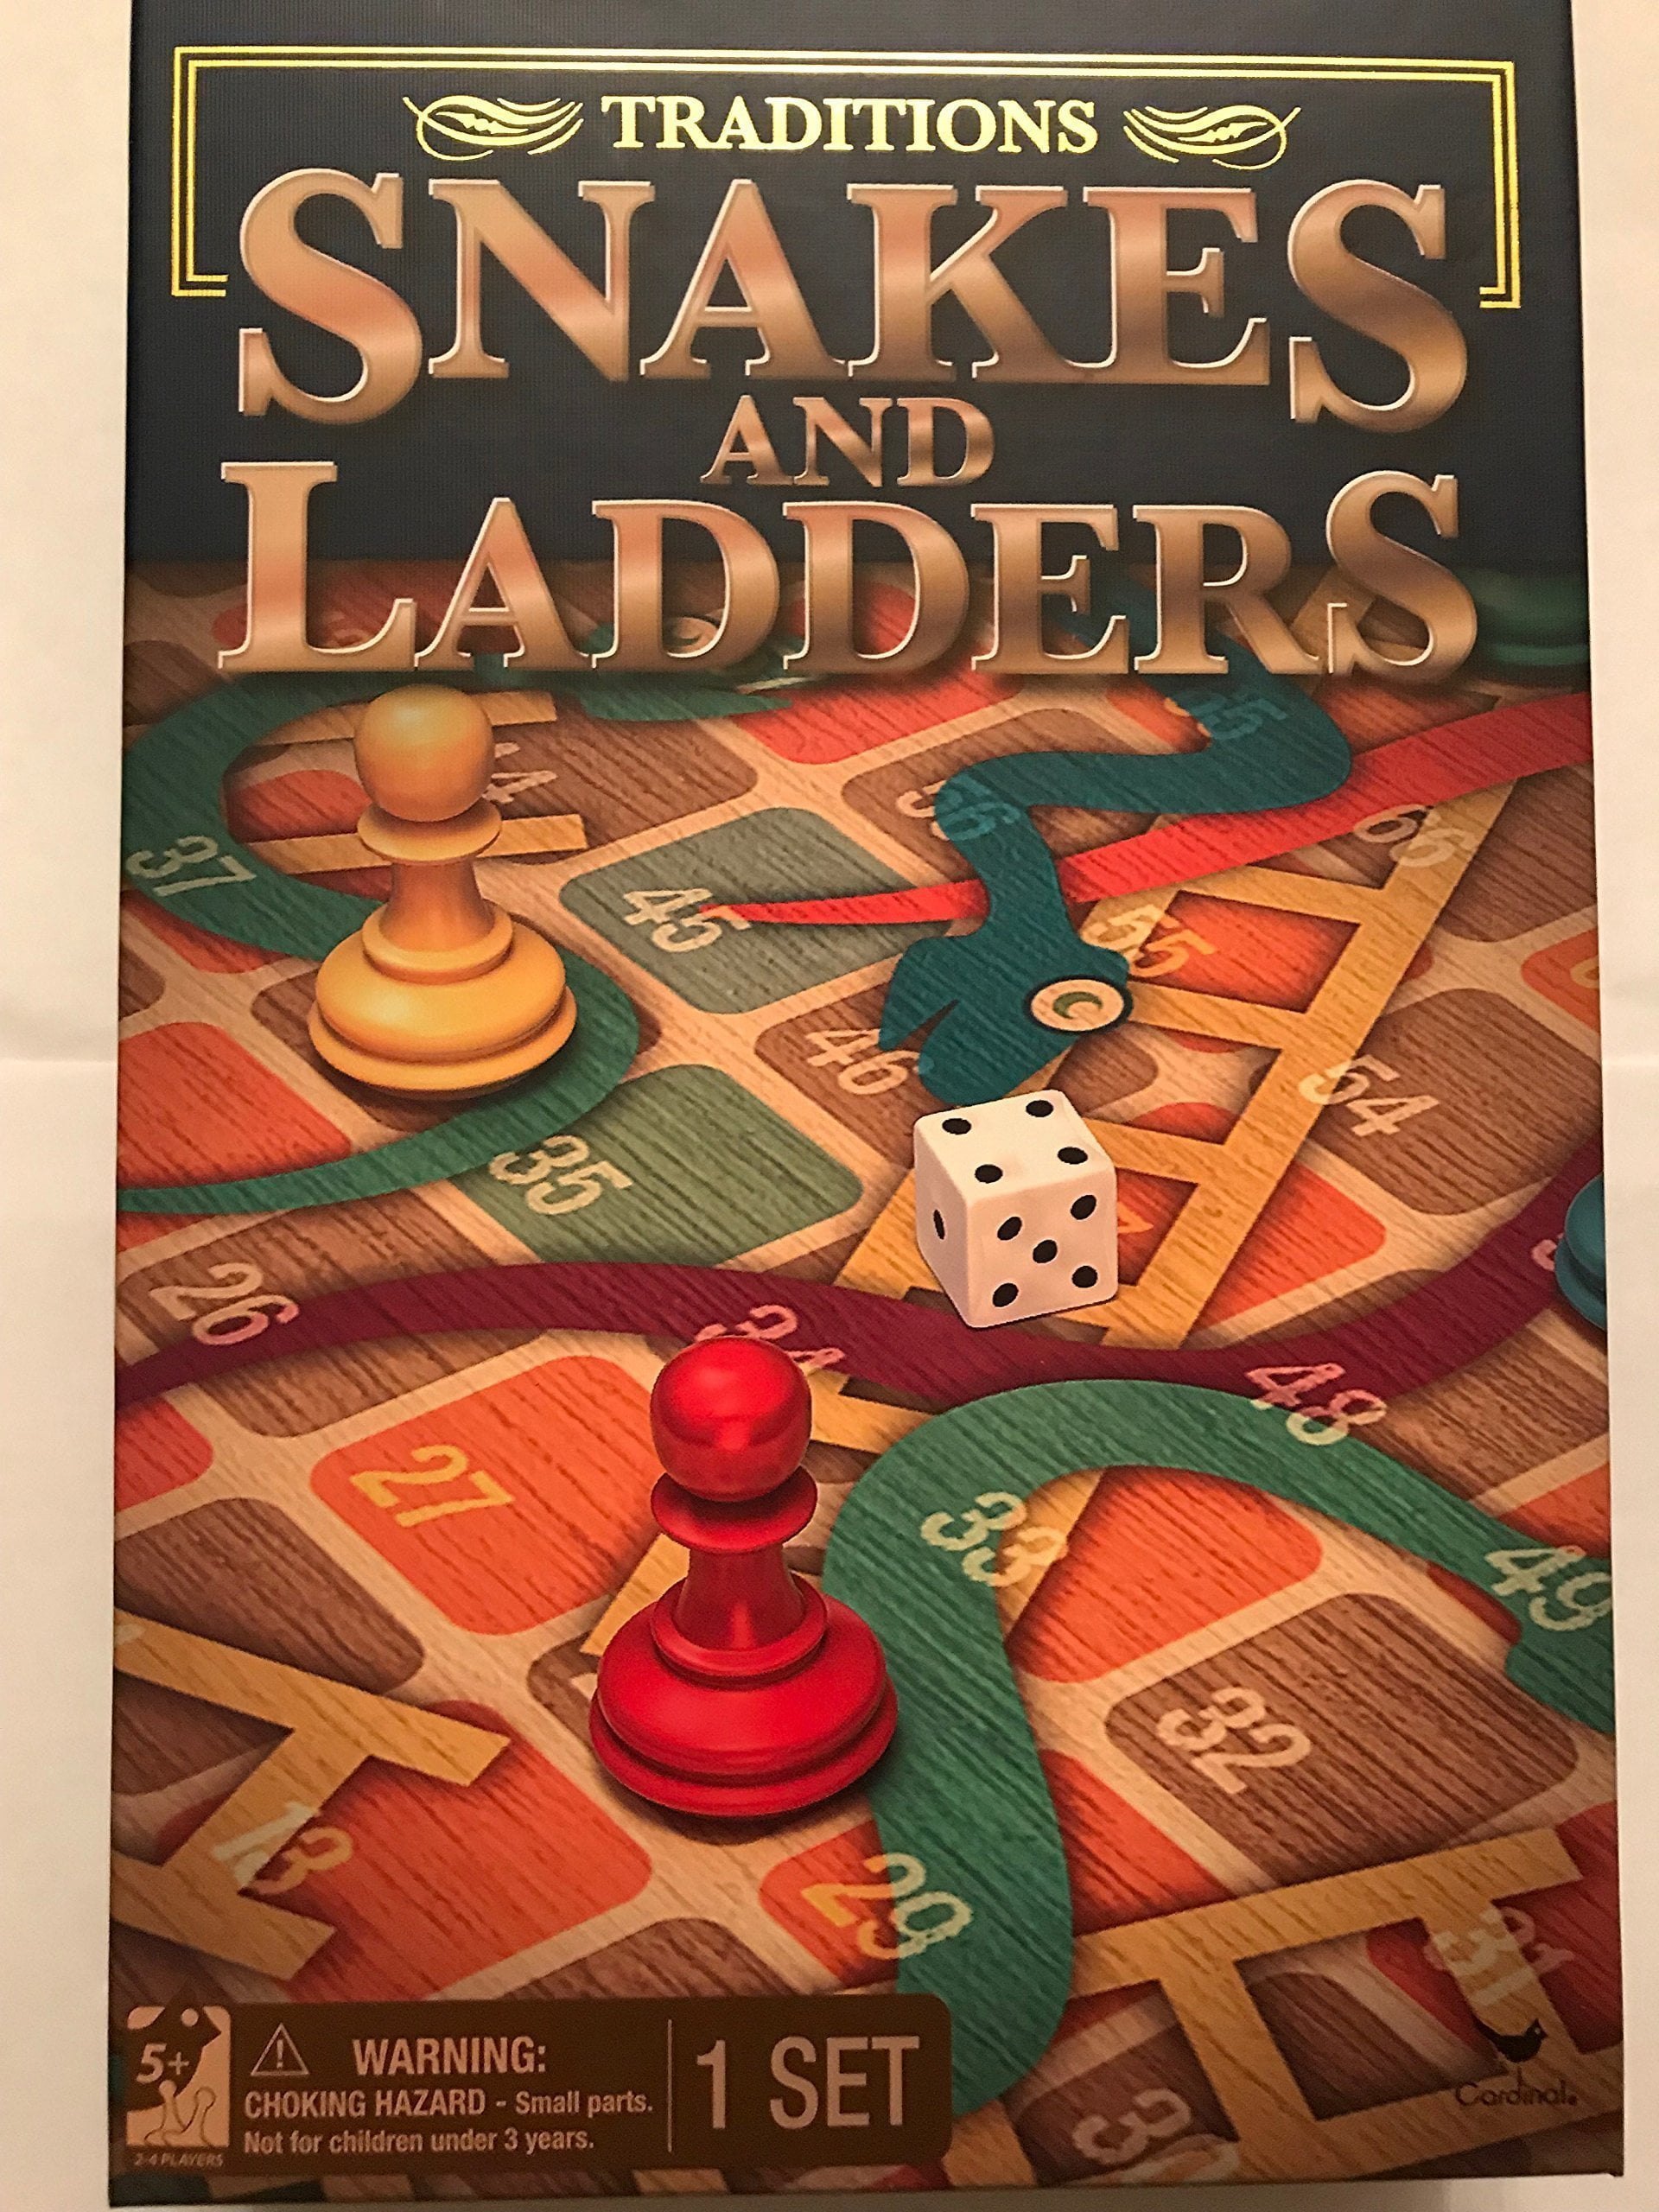 SNAKES AND LADDERS BOARD GAME 28335 TRADITIONAL FAMILY CLASSIC FUN KIDS GAME 